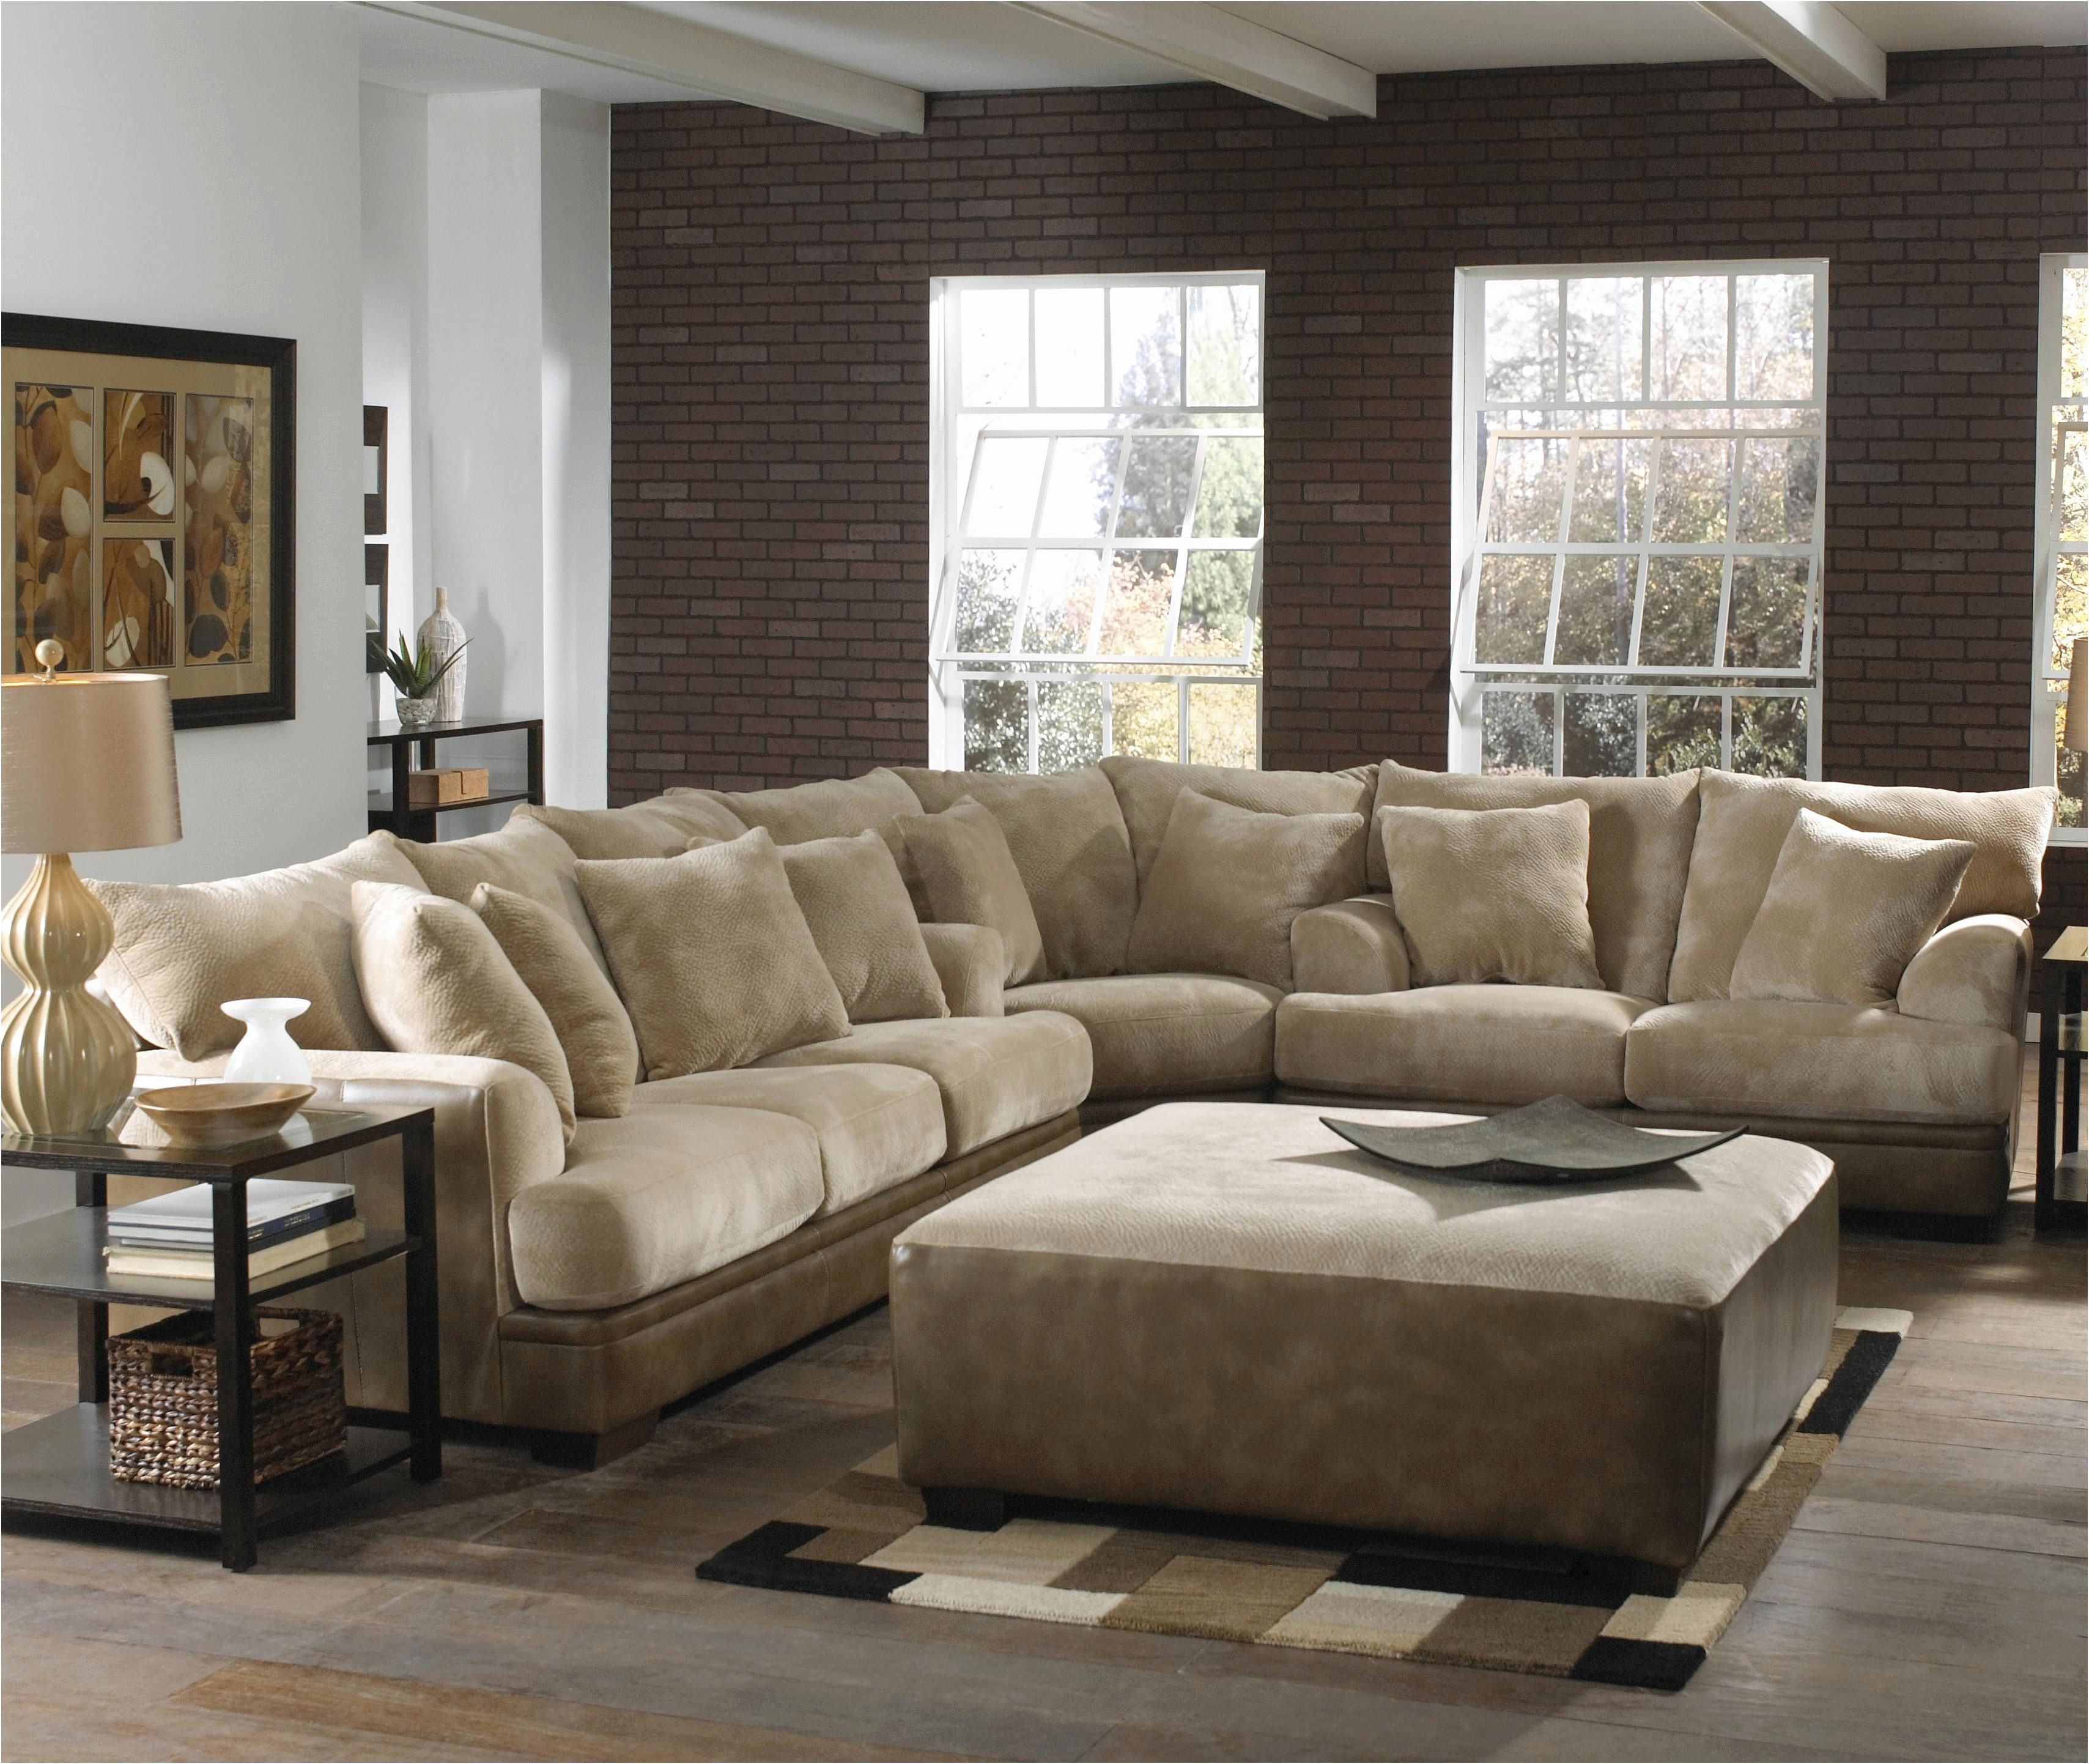 Plush Sectional Sofas With Most Recent Large U Shaped Sectional Sofas Hotelsbacau Com Sofa Plush (Photo 7 of 15)